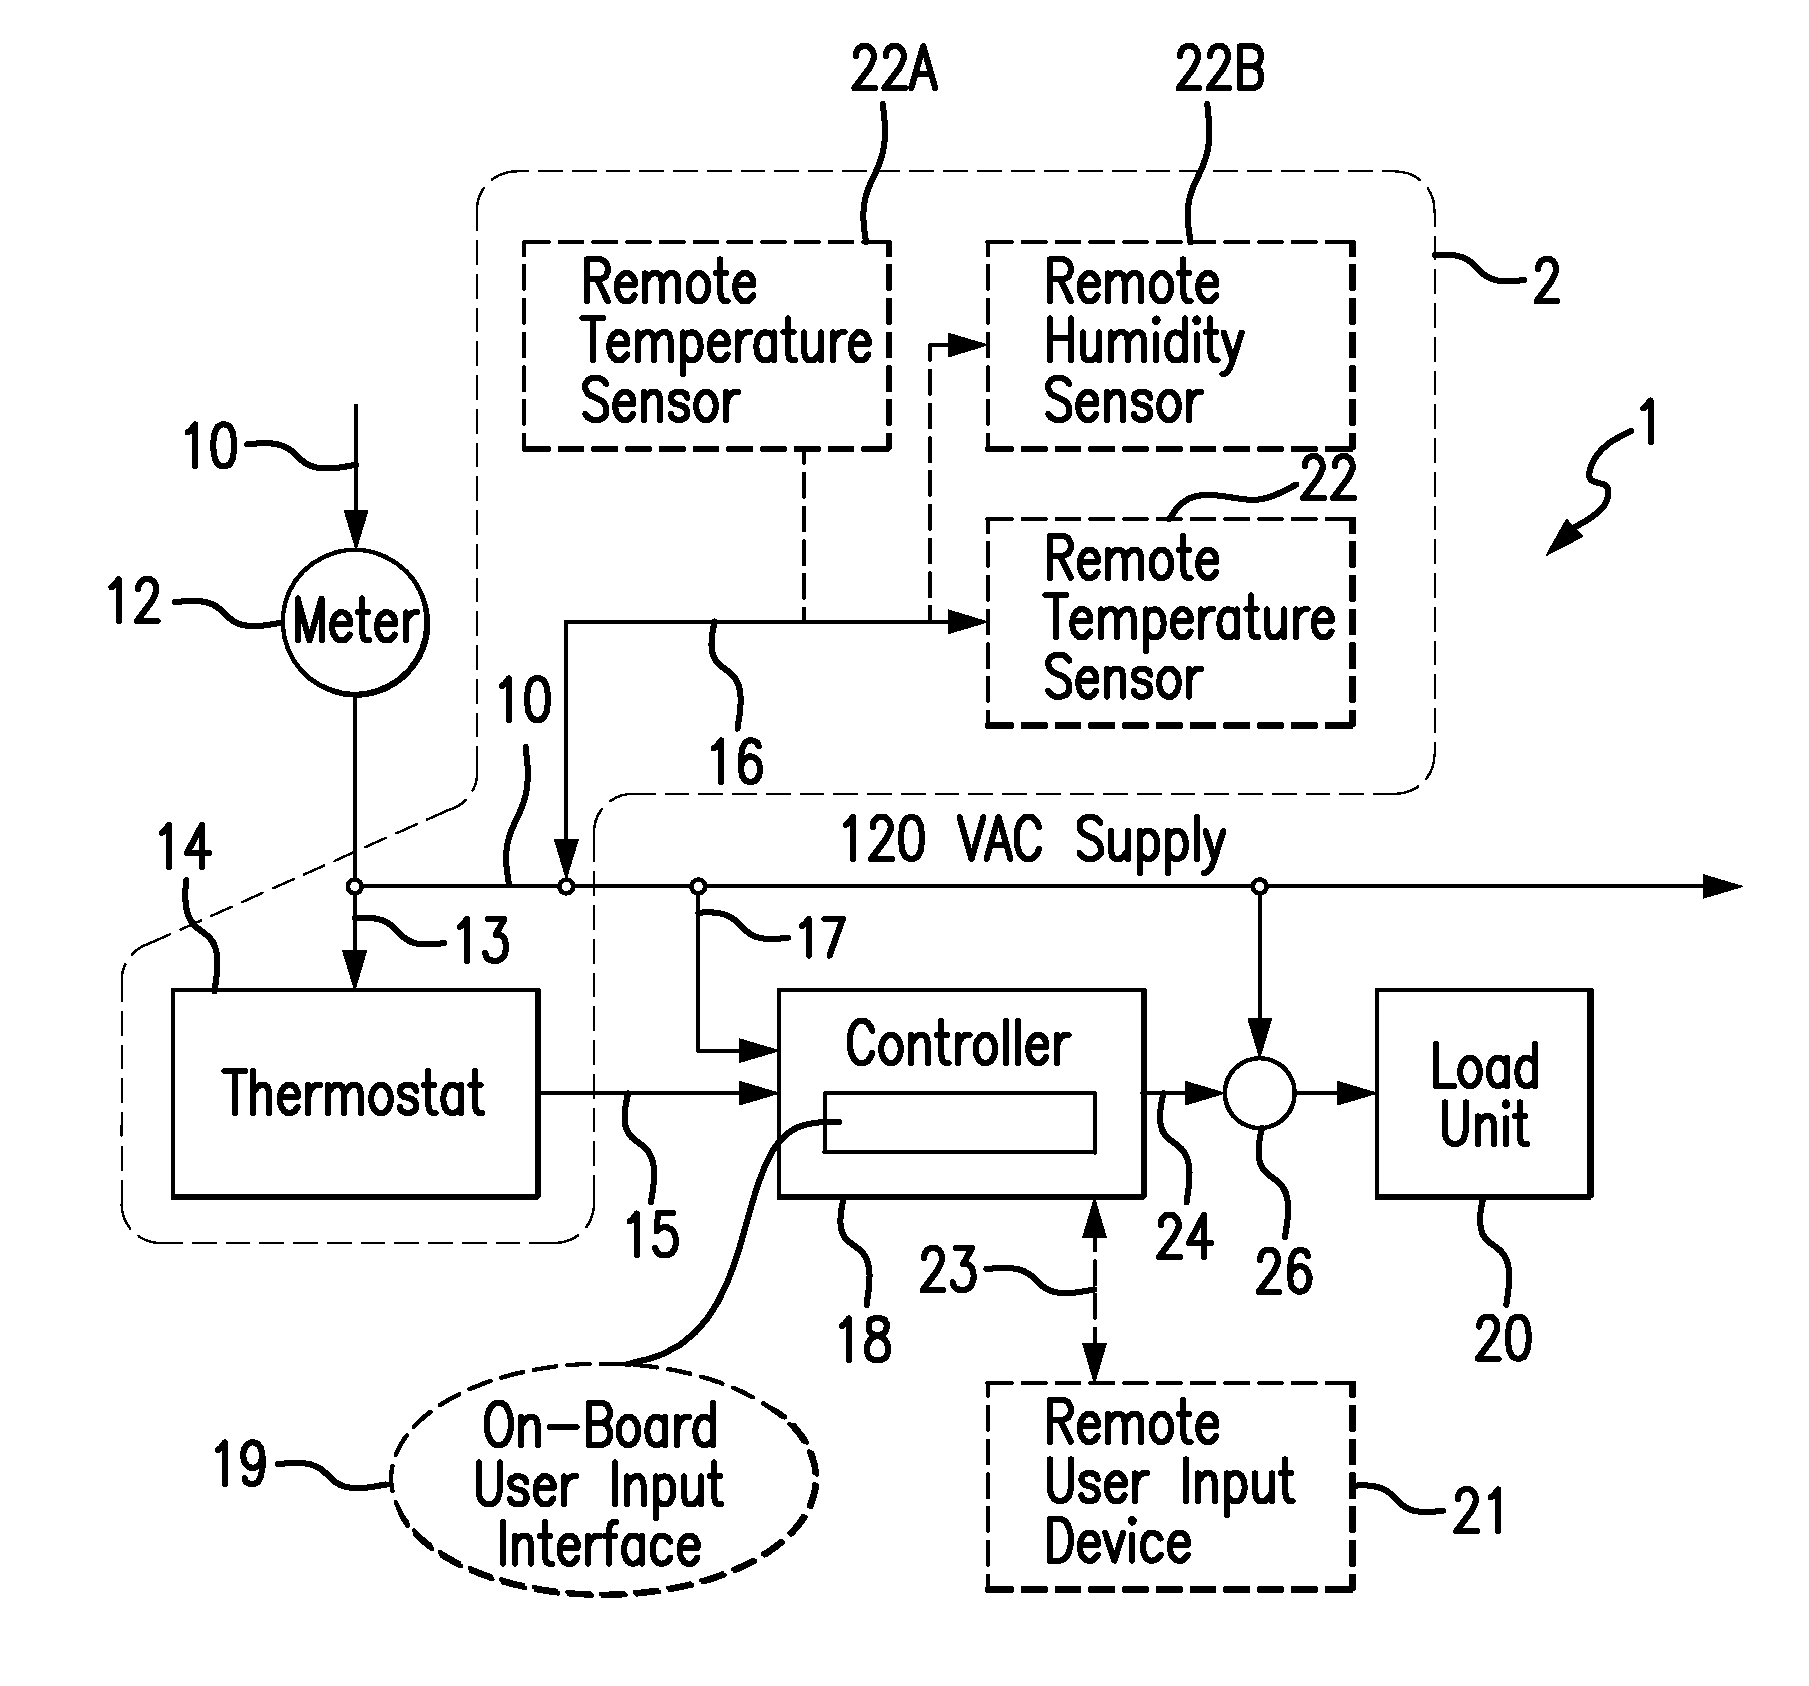 Controller For Automatic Control And Optimization Of Duty Cycled HVAC&R Equipment, And Systems And Methods Using Same